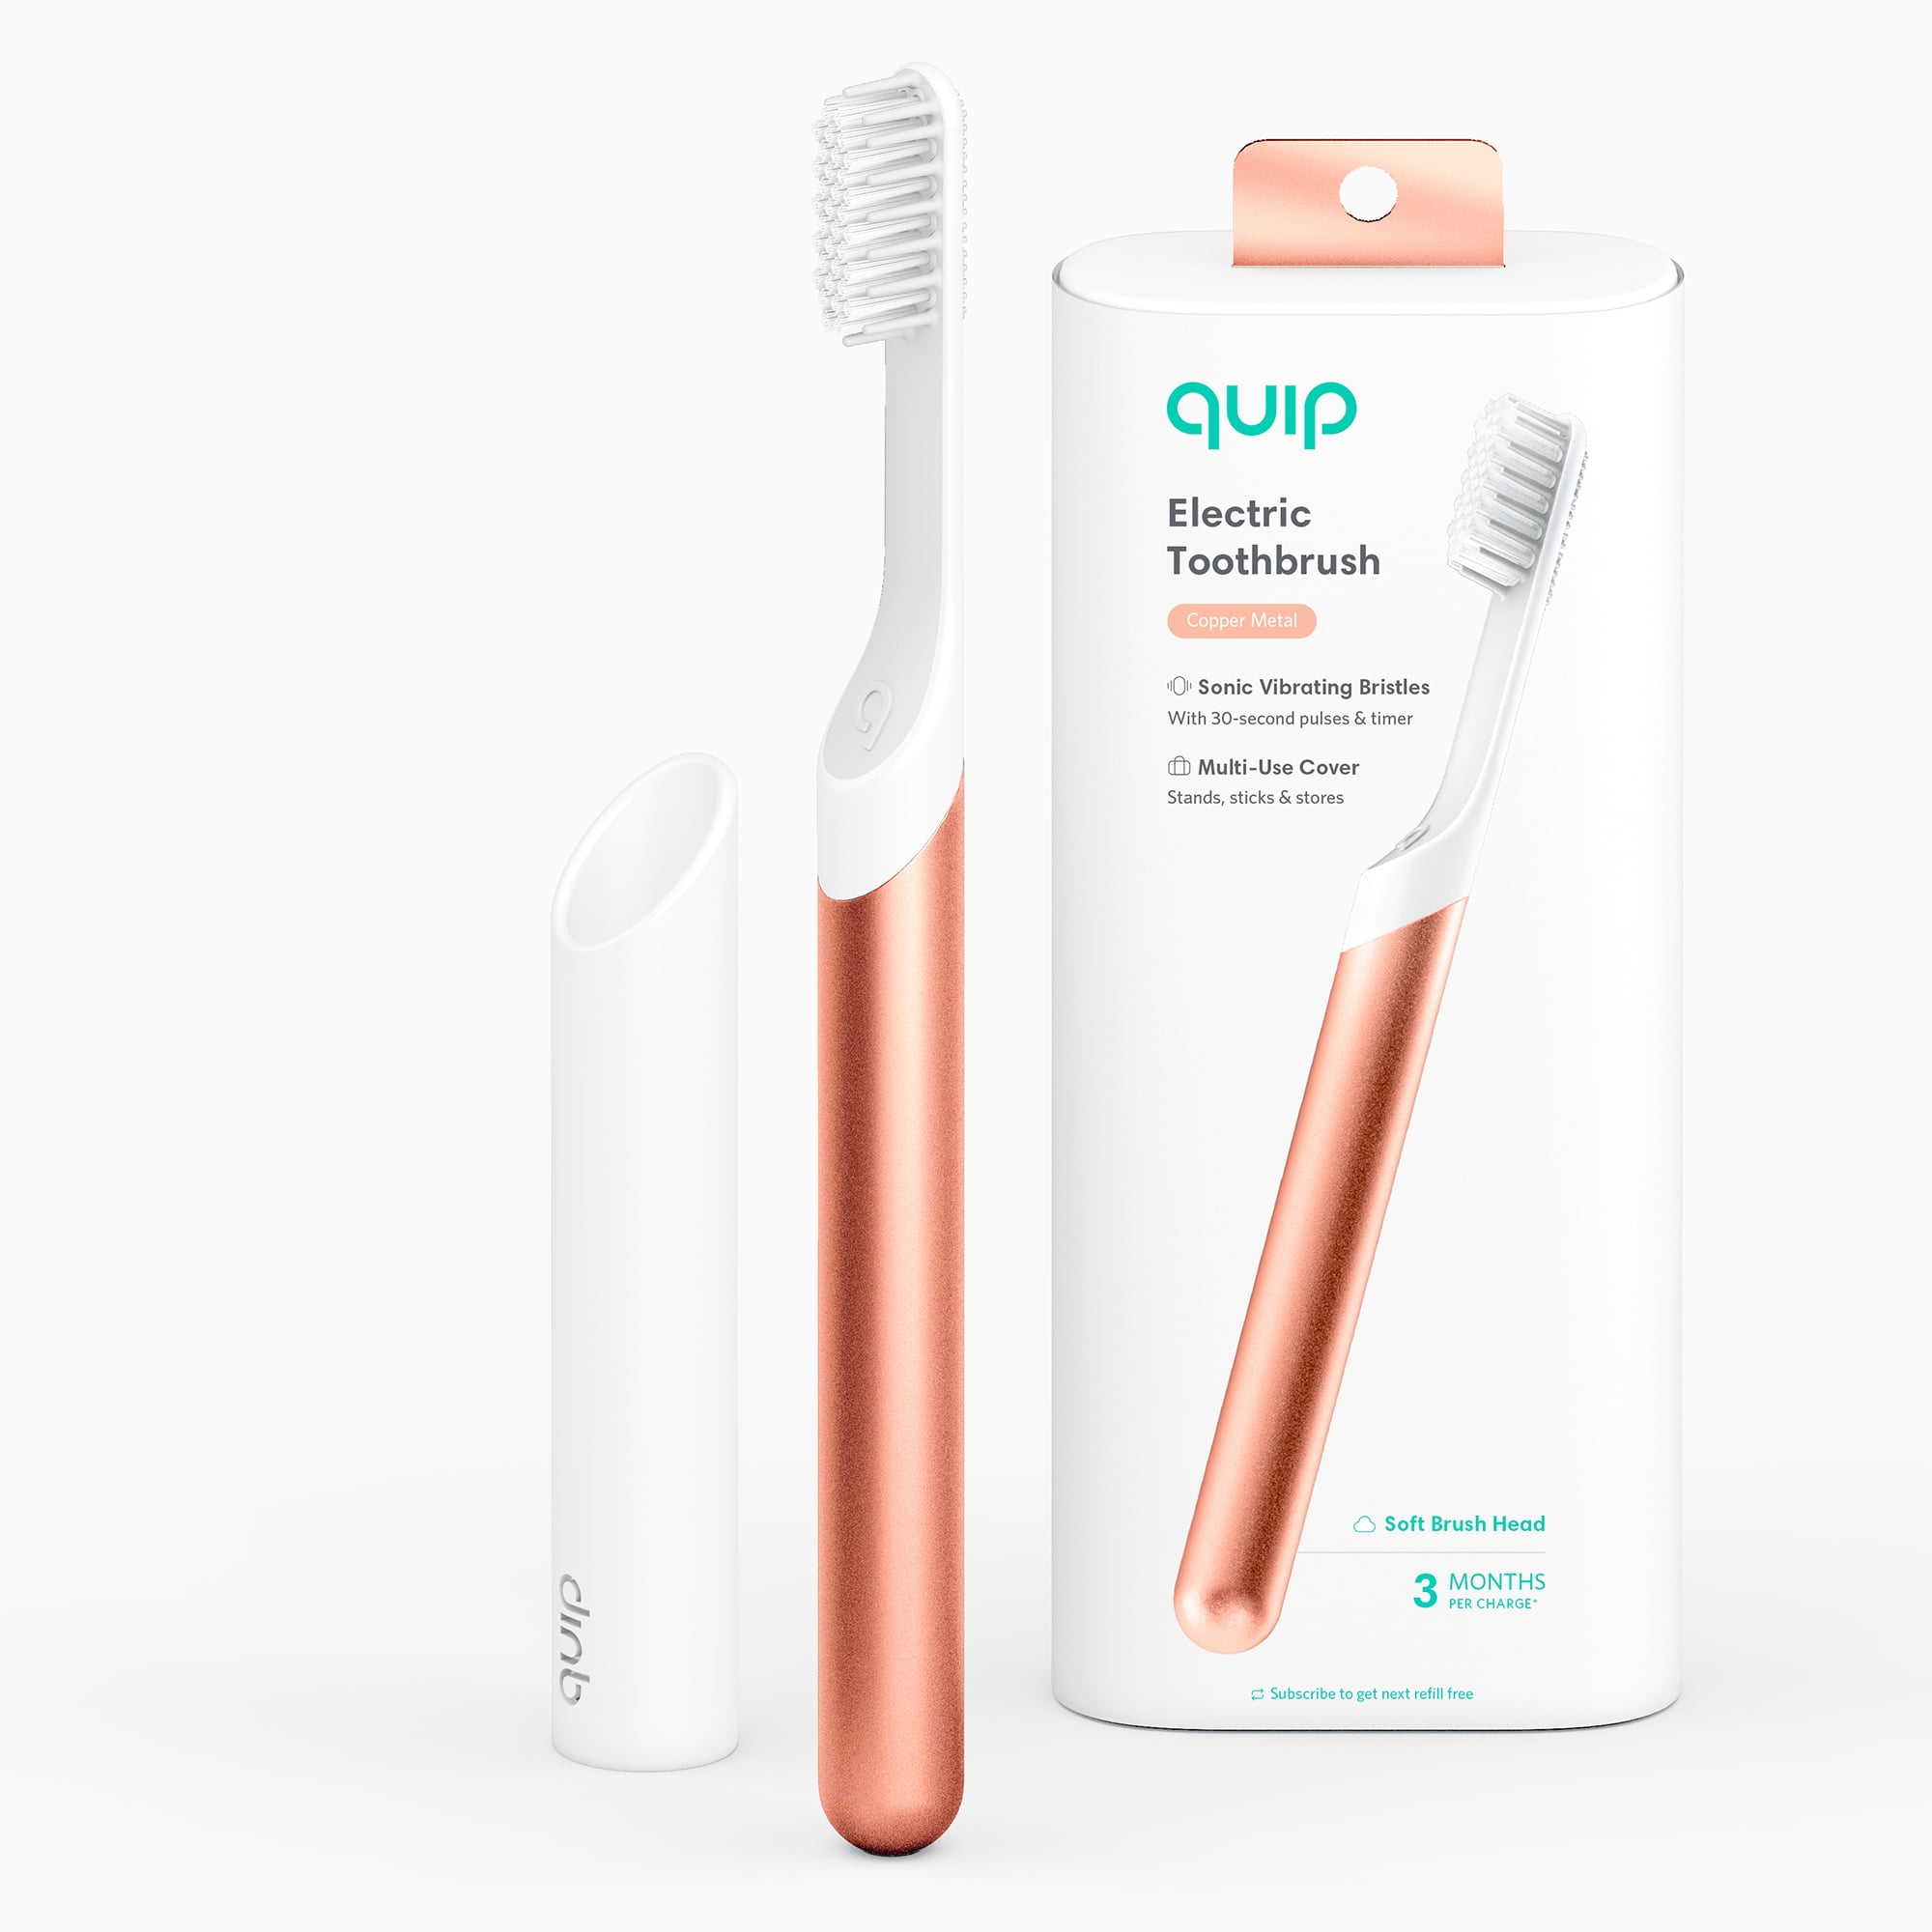 Quip Adult Electric Toothbrush w/ Full Head, Built-in Timer & Travel Case (Copper Metal) $15.10 + Free Shipping w/ Walmart+ or on $35+